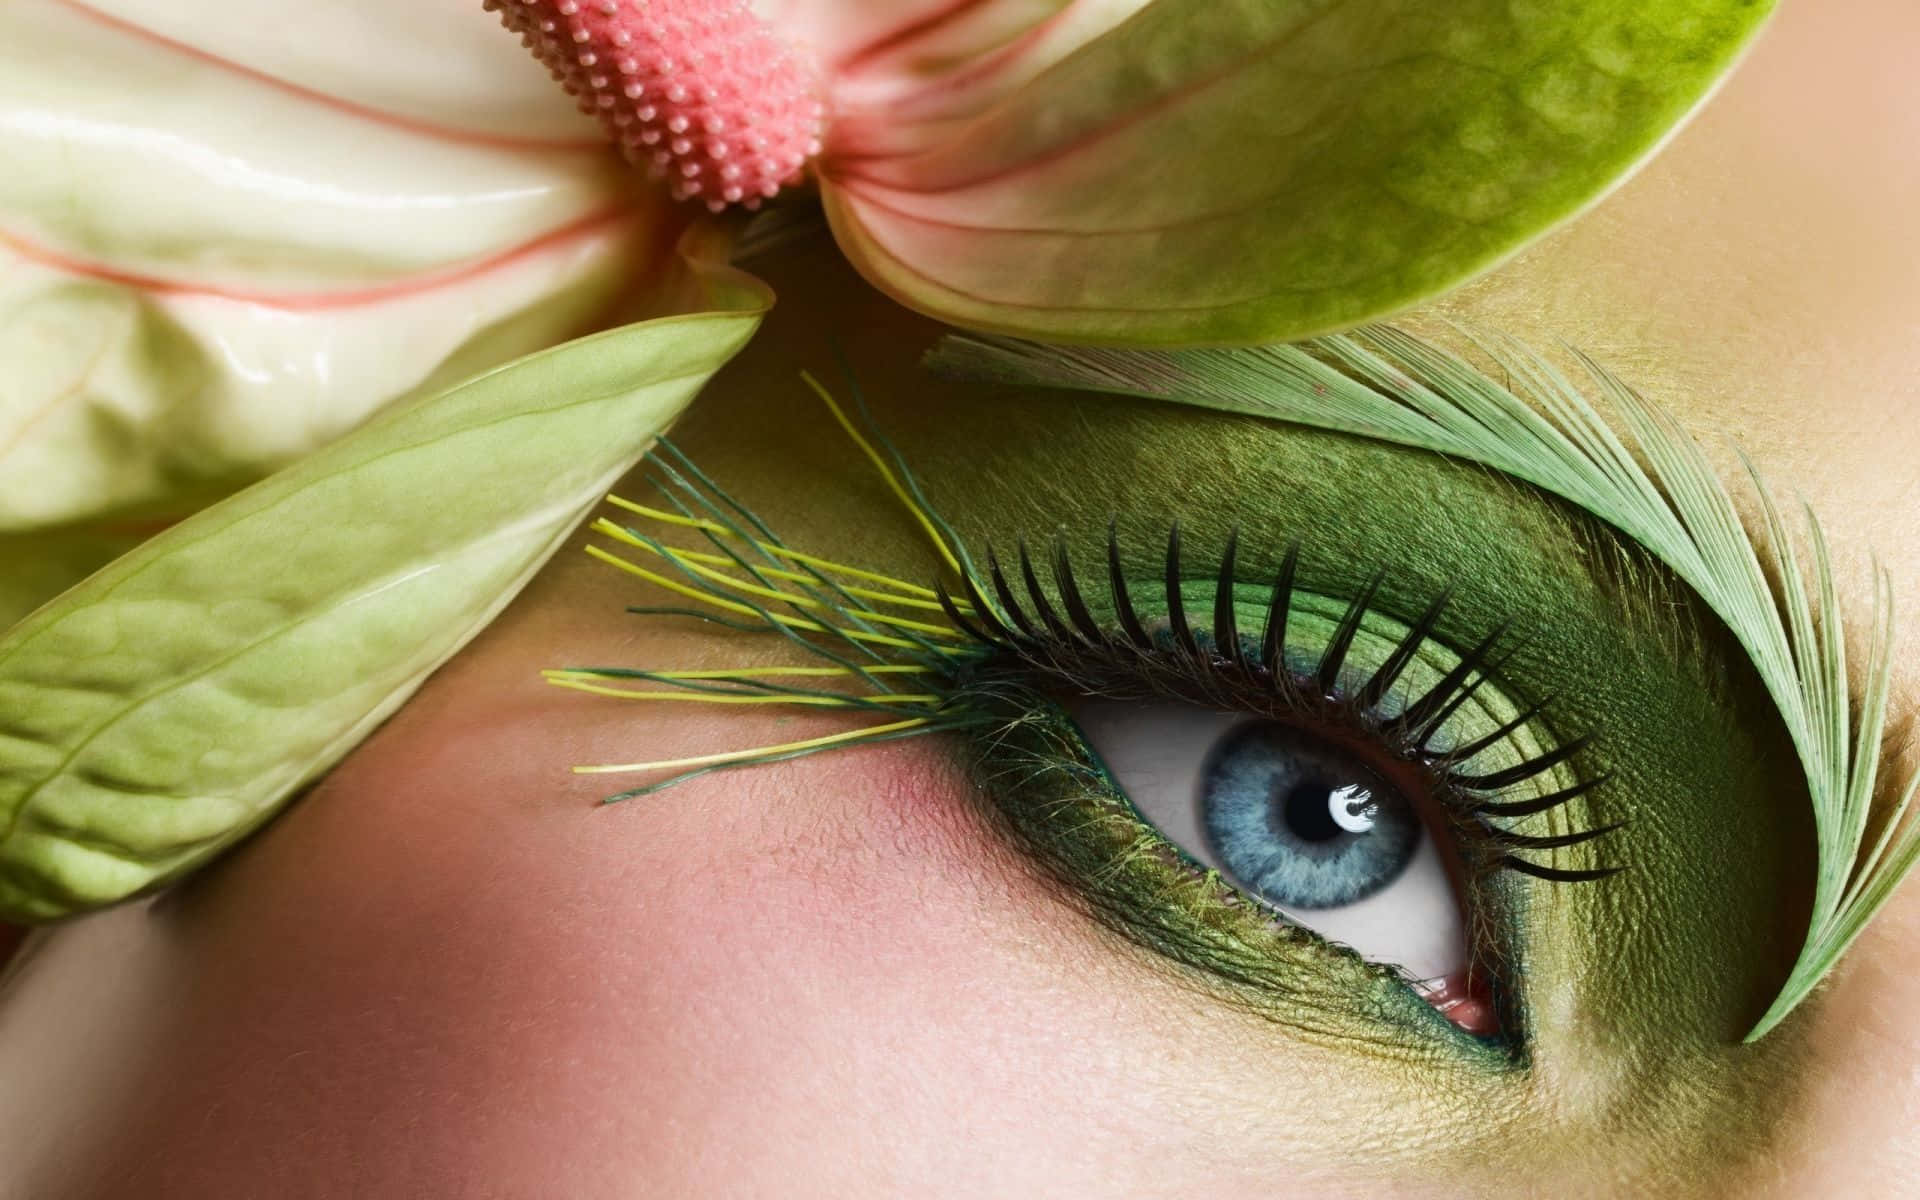 A Woman's Eye With Green Makeup And Feathers